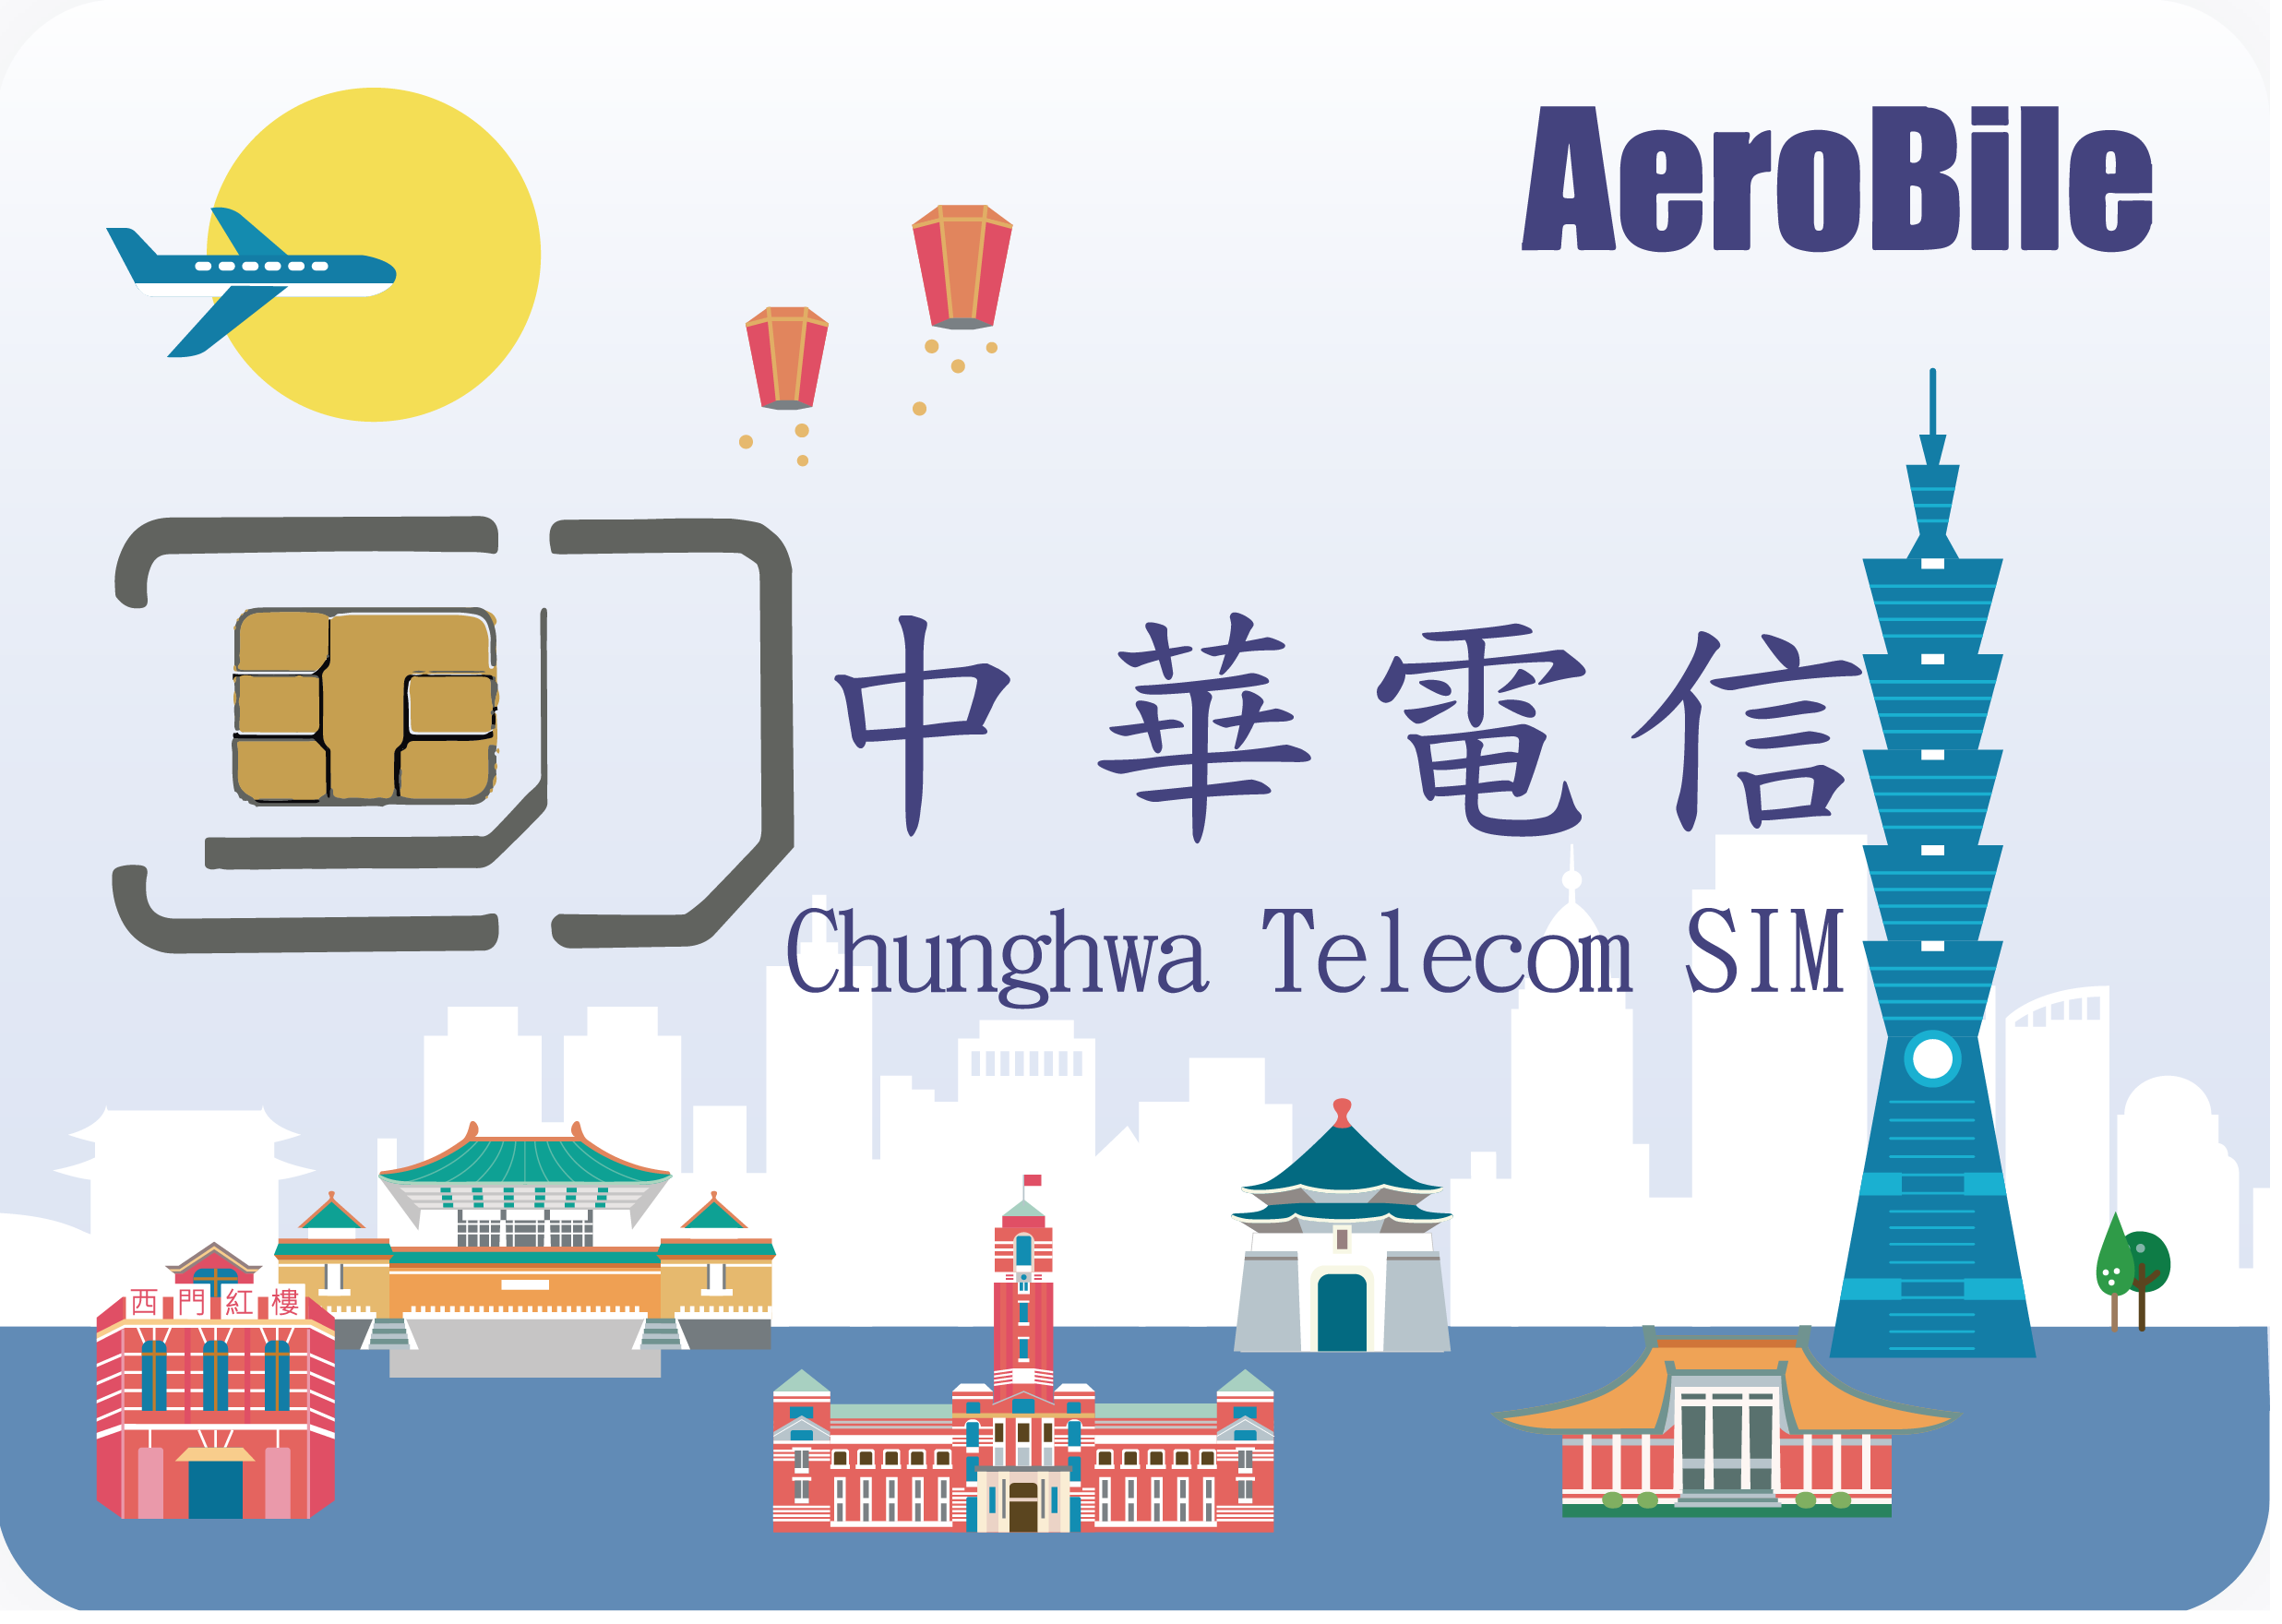 Taiwan Chunghwa Telecom SIM 30 days unlimited 4G LTE data include voice and text